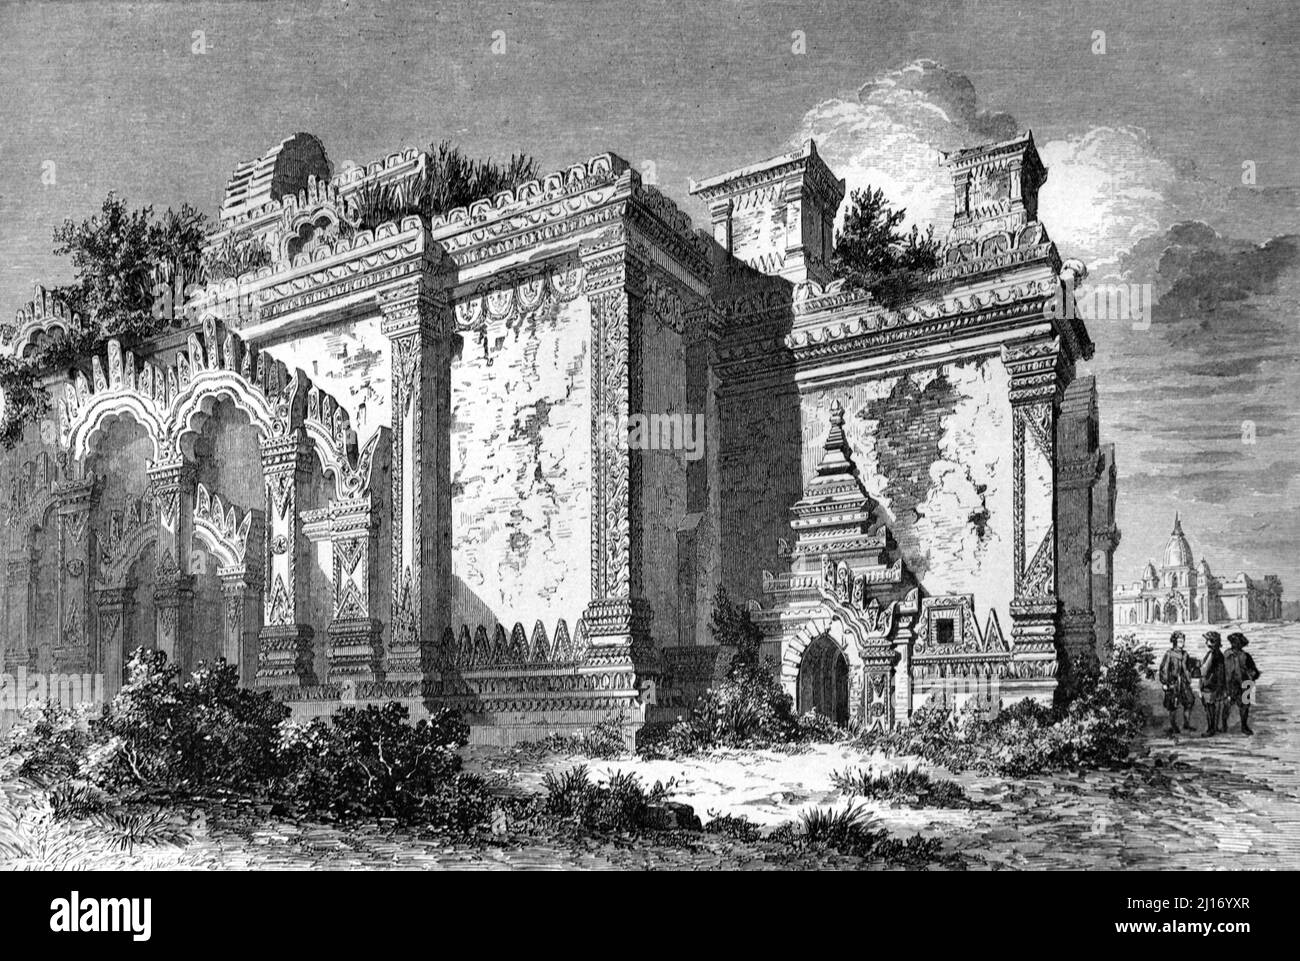 Ruined Buddhist Temples at Bagan, formerly Pagan, Myanmar or Burma. Vintage Illustration or Engraving 1860. Stock Photo